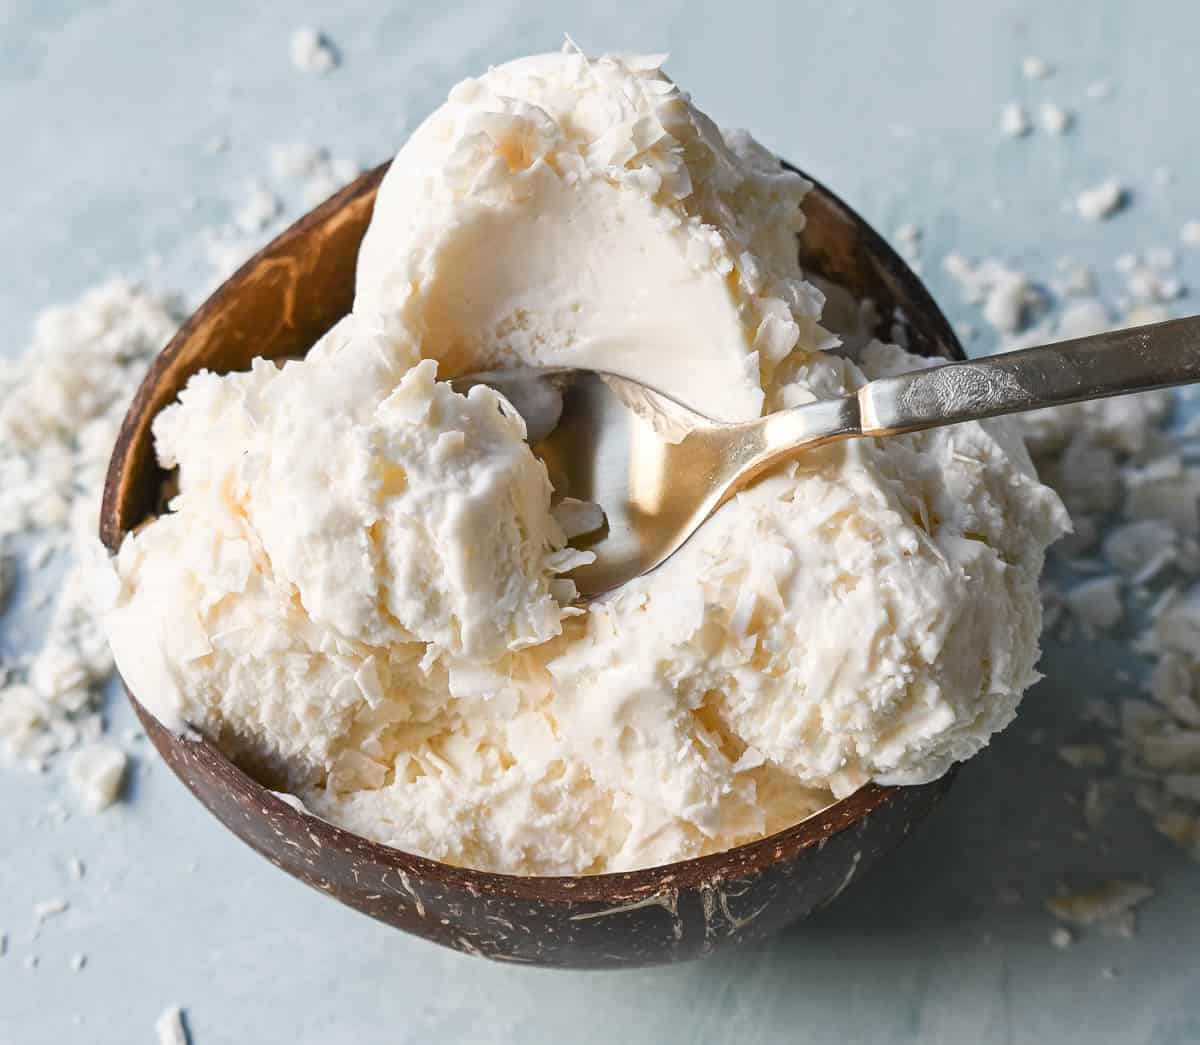 Easy no churn coconut ice cream is creamy, fresh, and flavorful. Made with only cream of coconut and heavy cream, this is the simplest coconut ice cream recipe. No ice cream maker required!